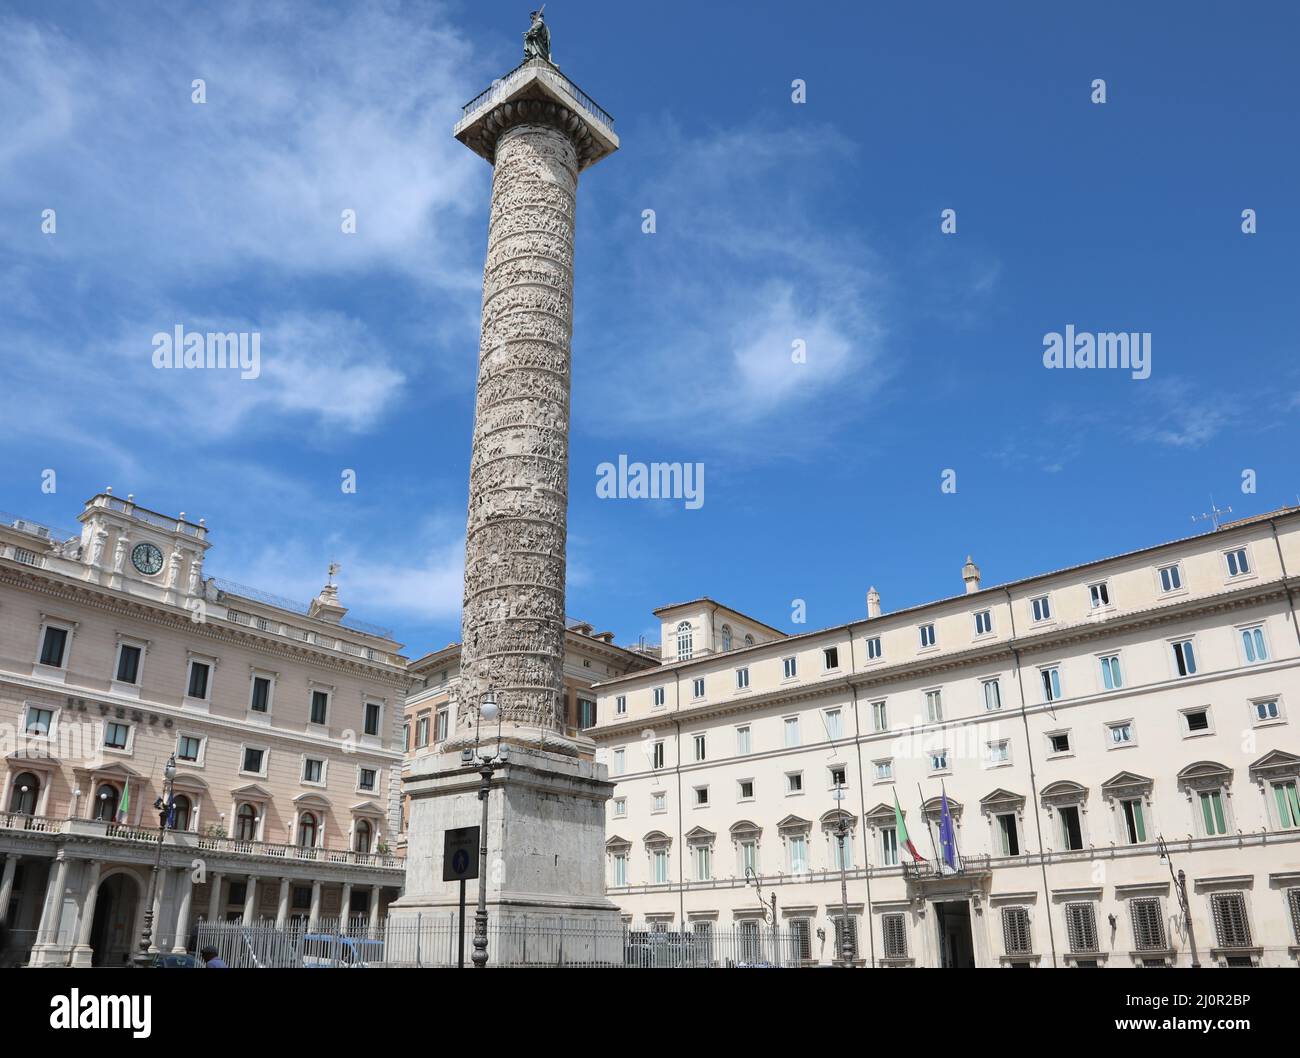 Rome, RM, Italy - August 18, 2020:  Ancient Roman column and In the background the building called Palazzo Chigi seat of the Italian government Stock Photo